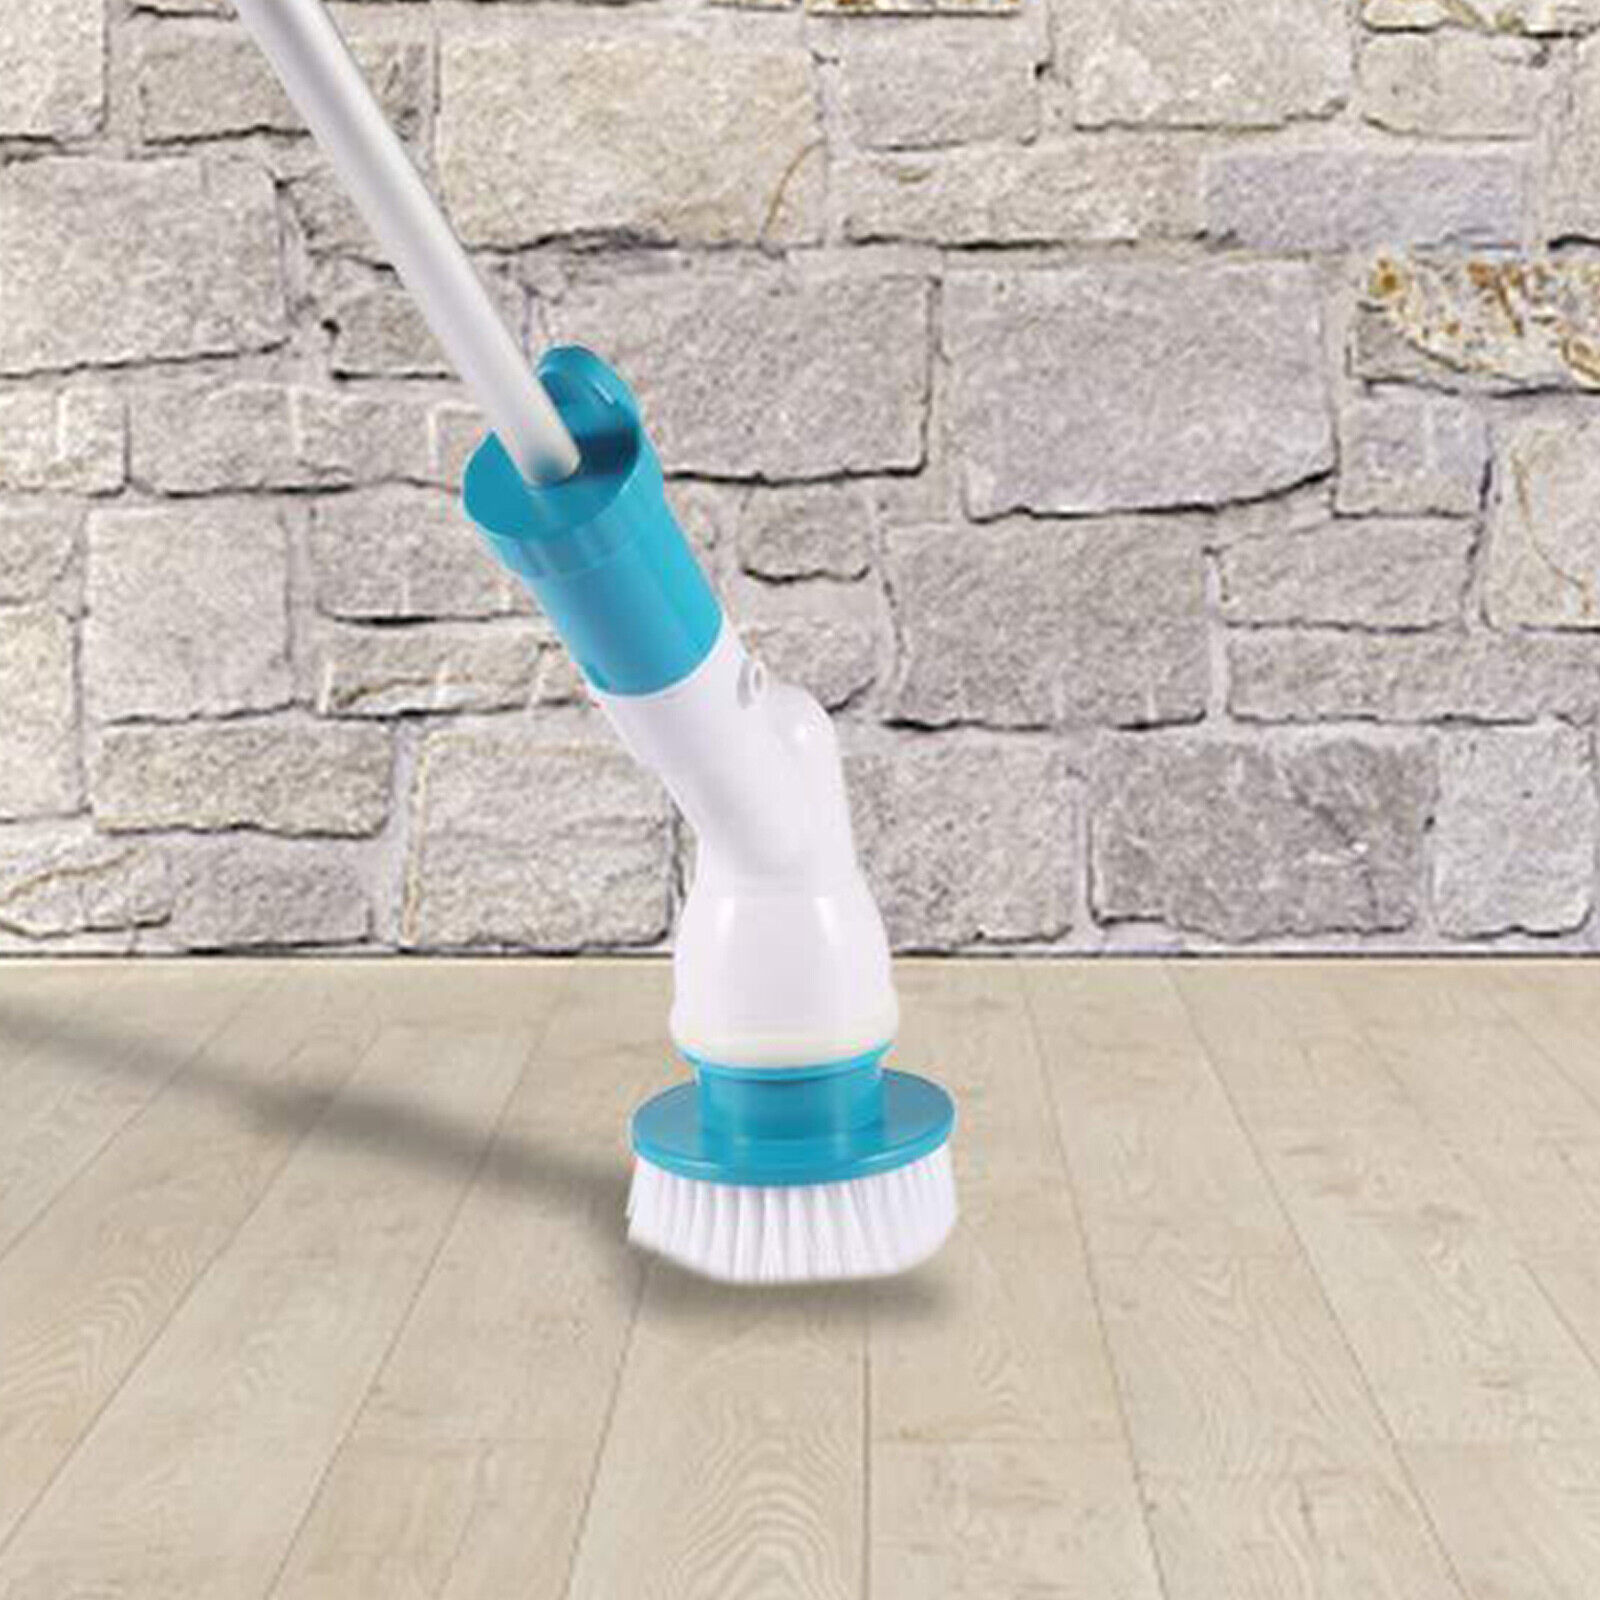 OotySky Electric Spin Scrubber, Electric Cleaning Brush, Bathroom